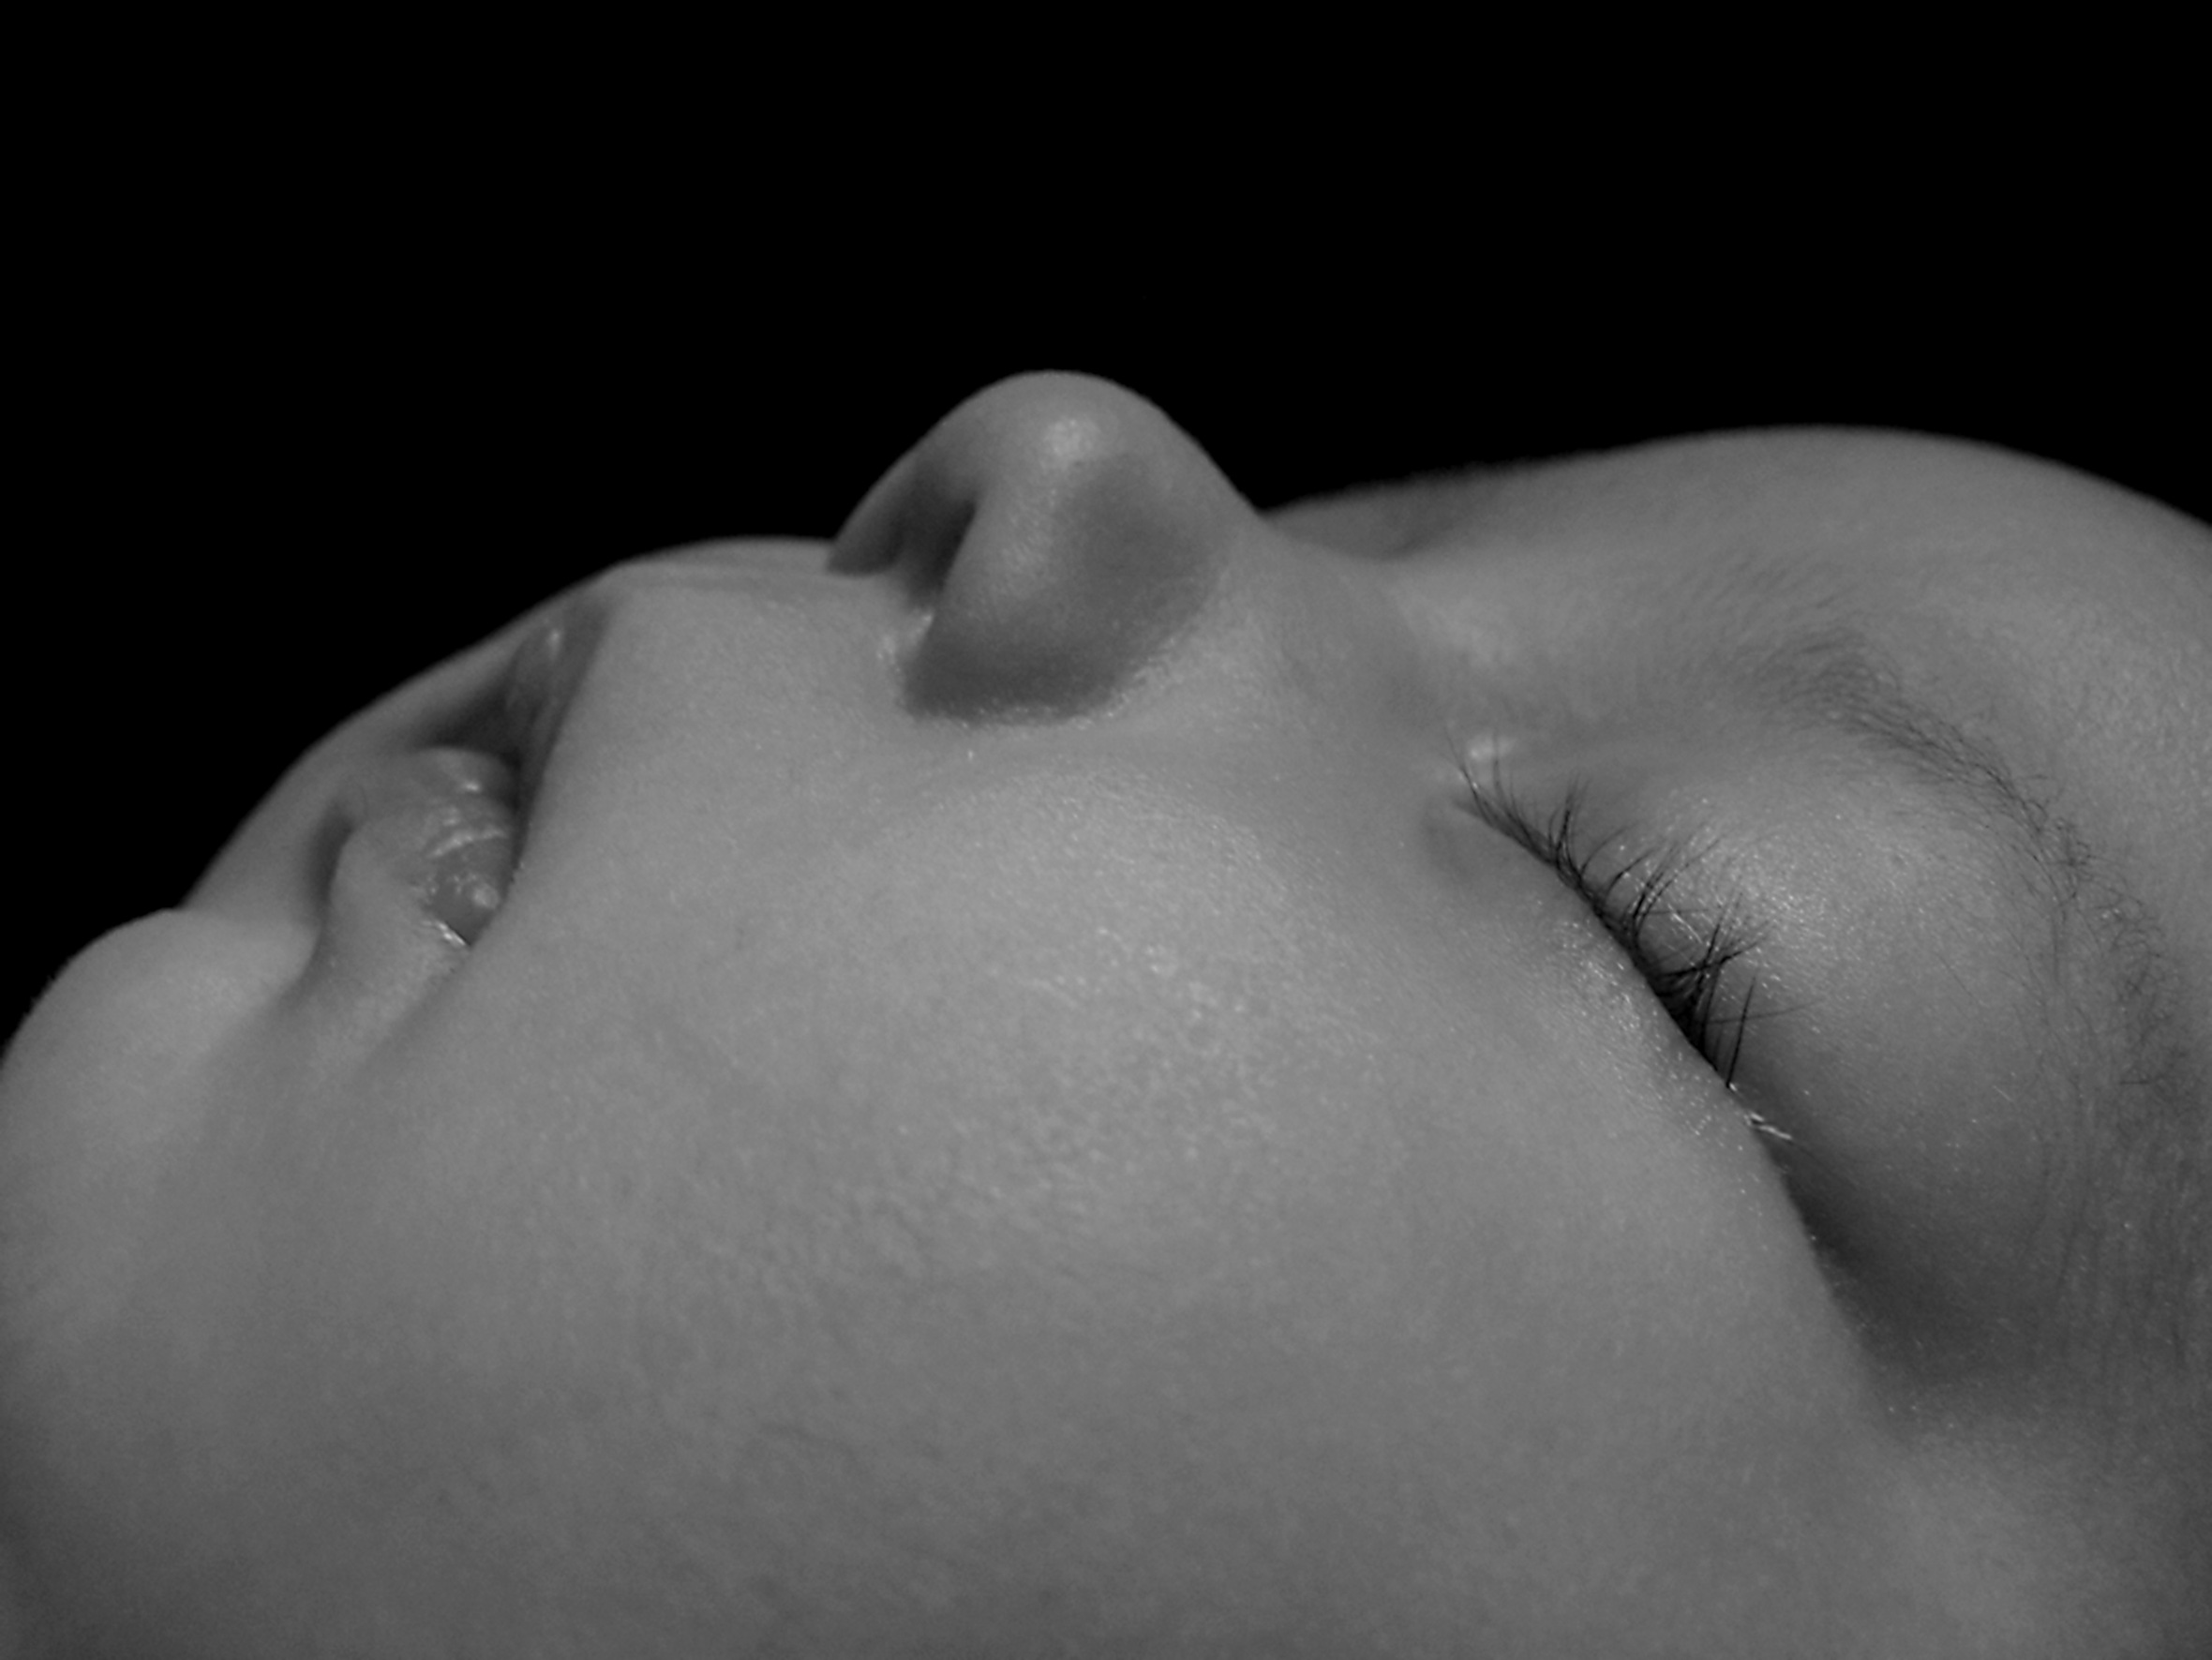 Close-up of an infant’s face who is sleeping on their back.